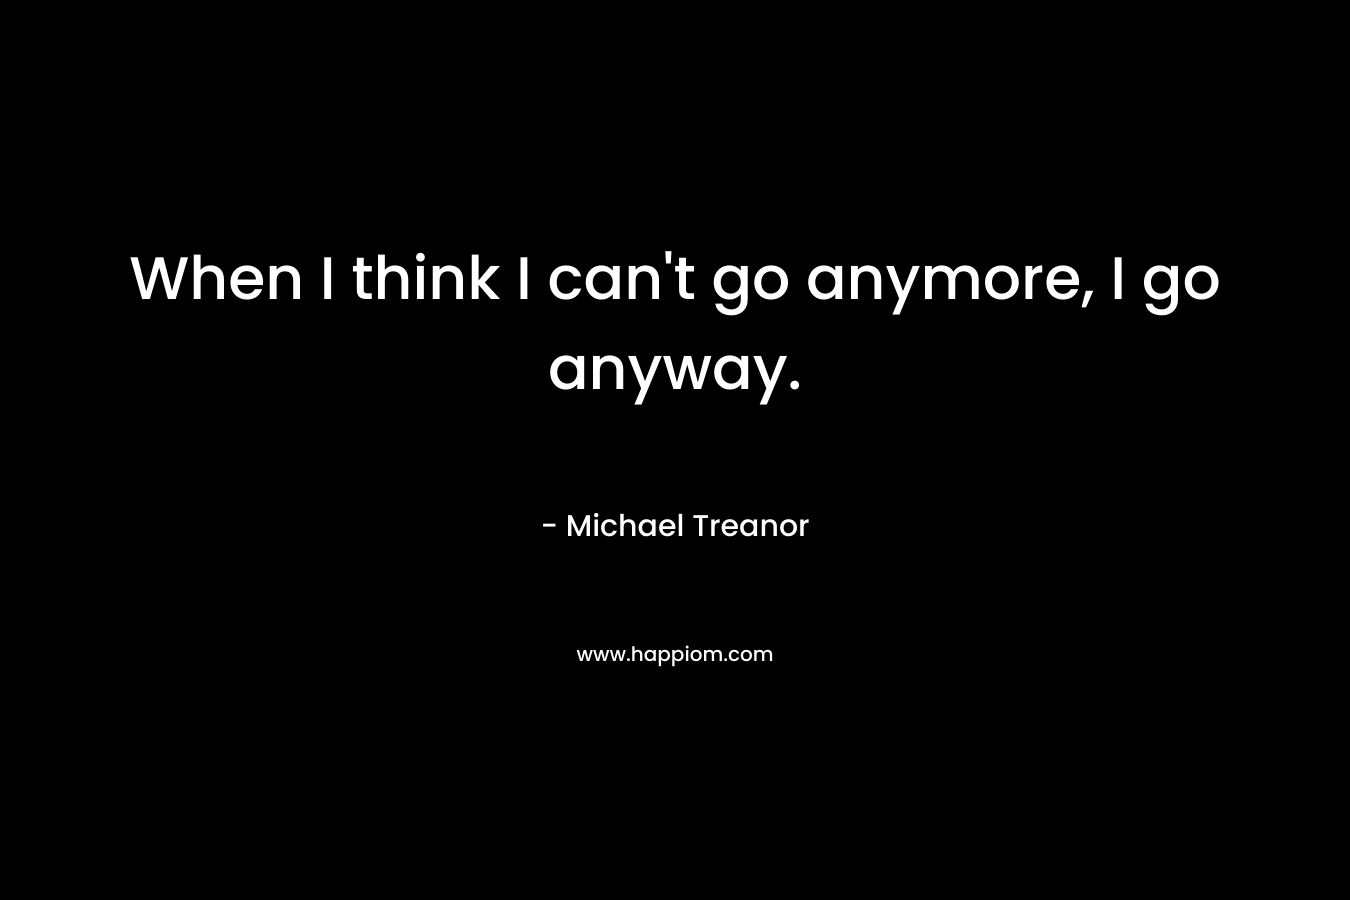 When I think I can’t go anymore, I go anyway. – Michael Treanor